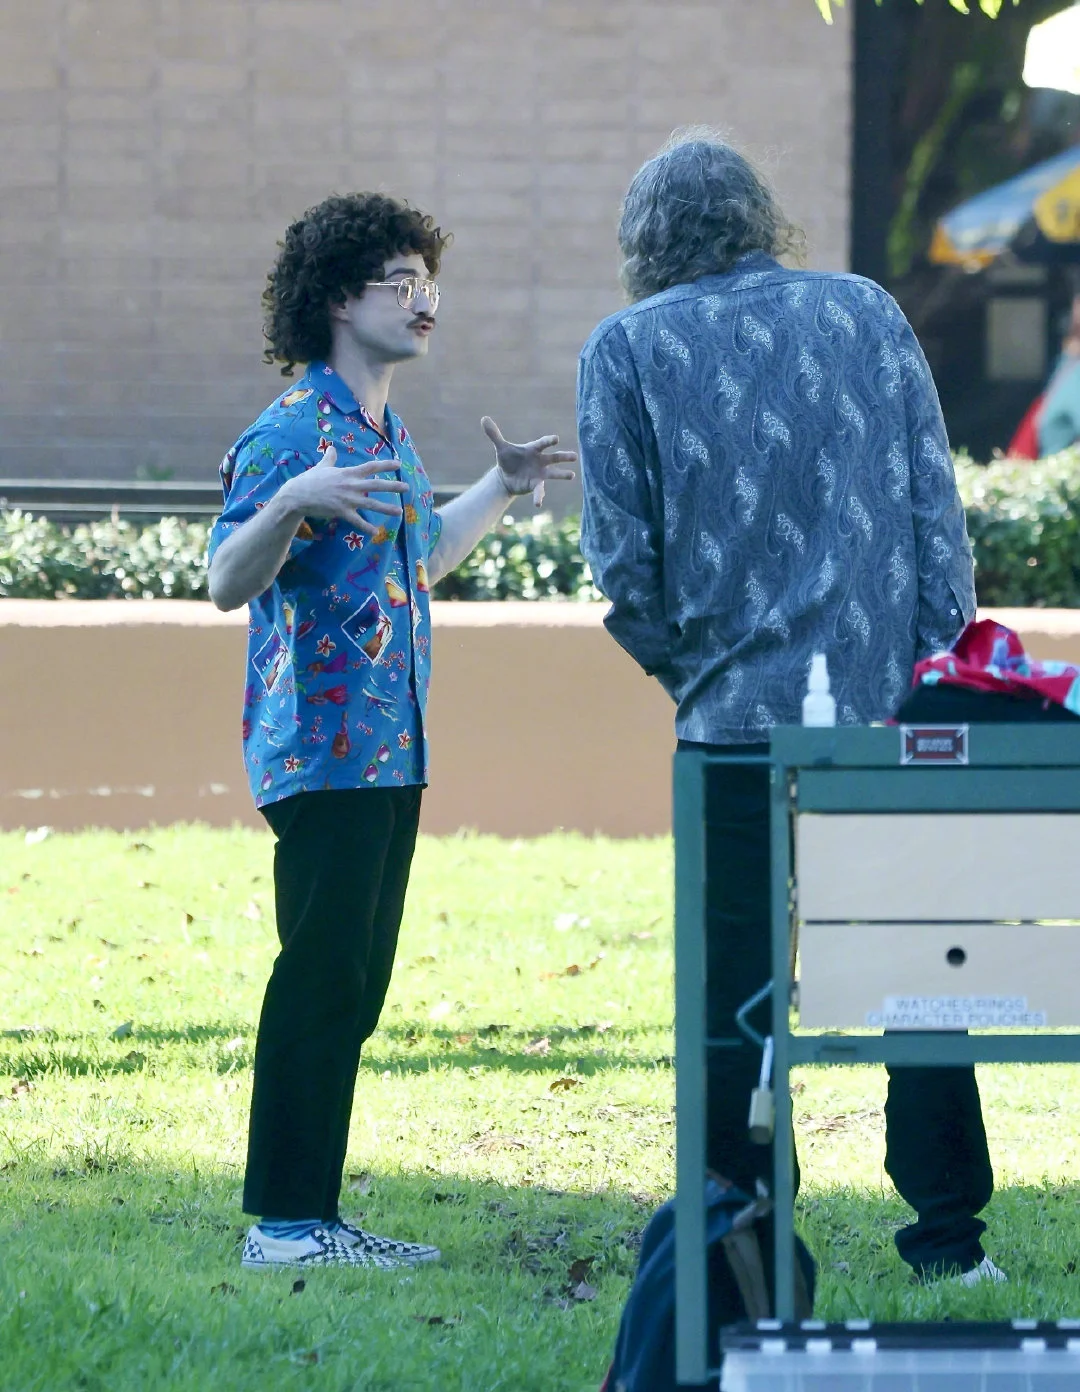 "WEIRD: The Al Yankovic Story": Daniel Radcliffe stars in Al' Yankovic biopic and chats with Yankovic himself on set